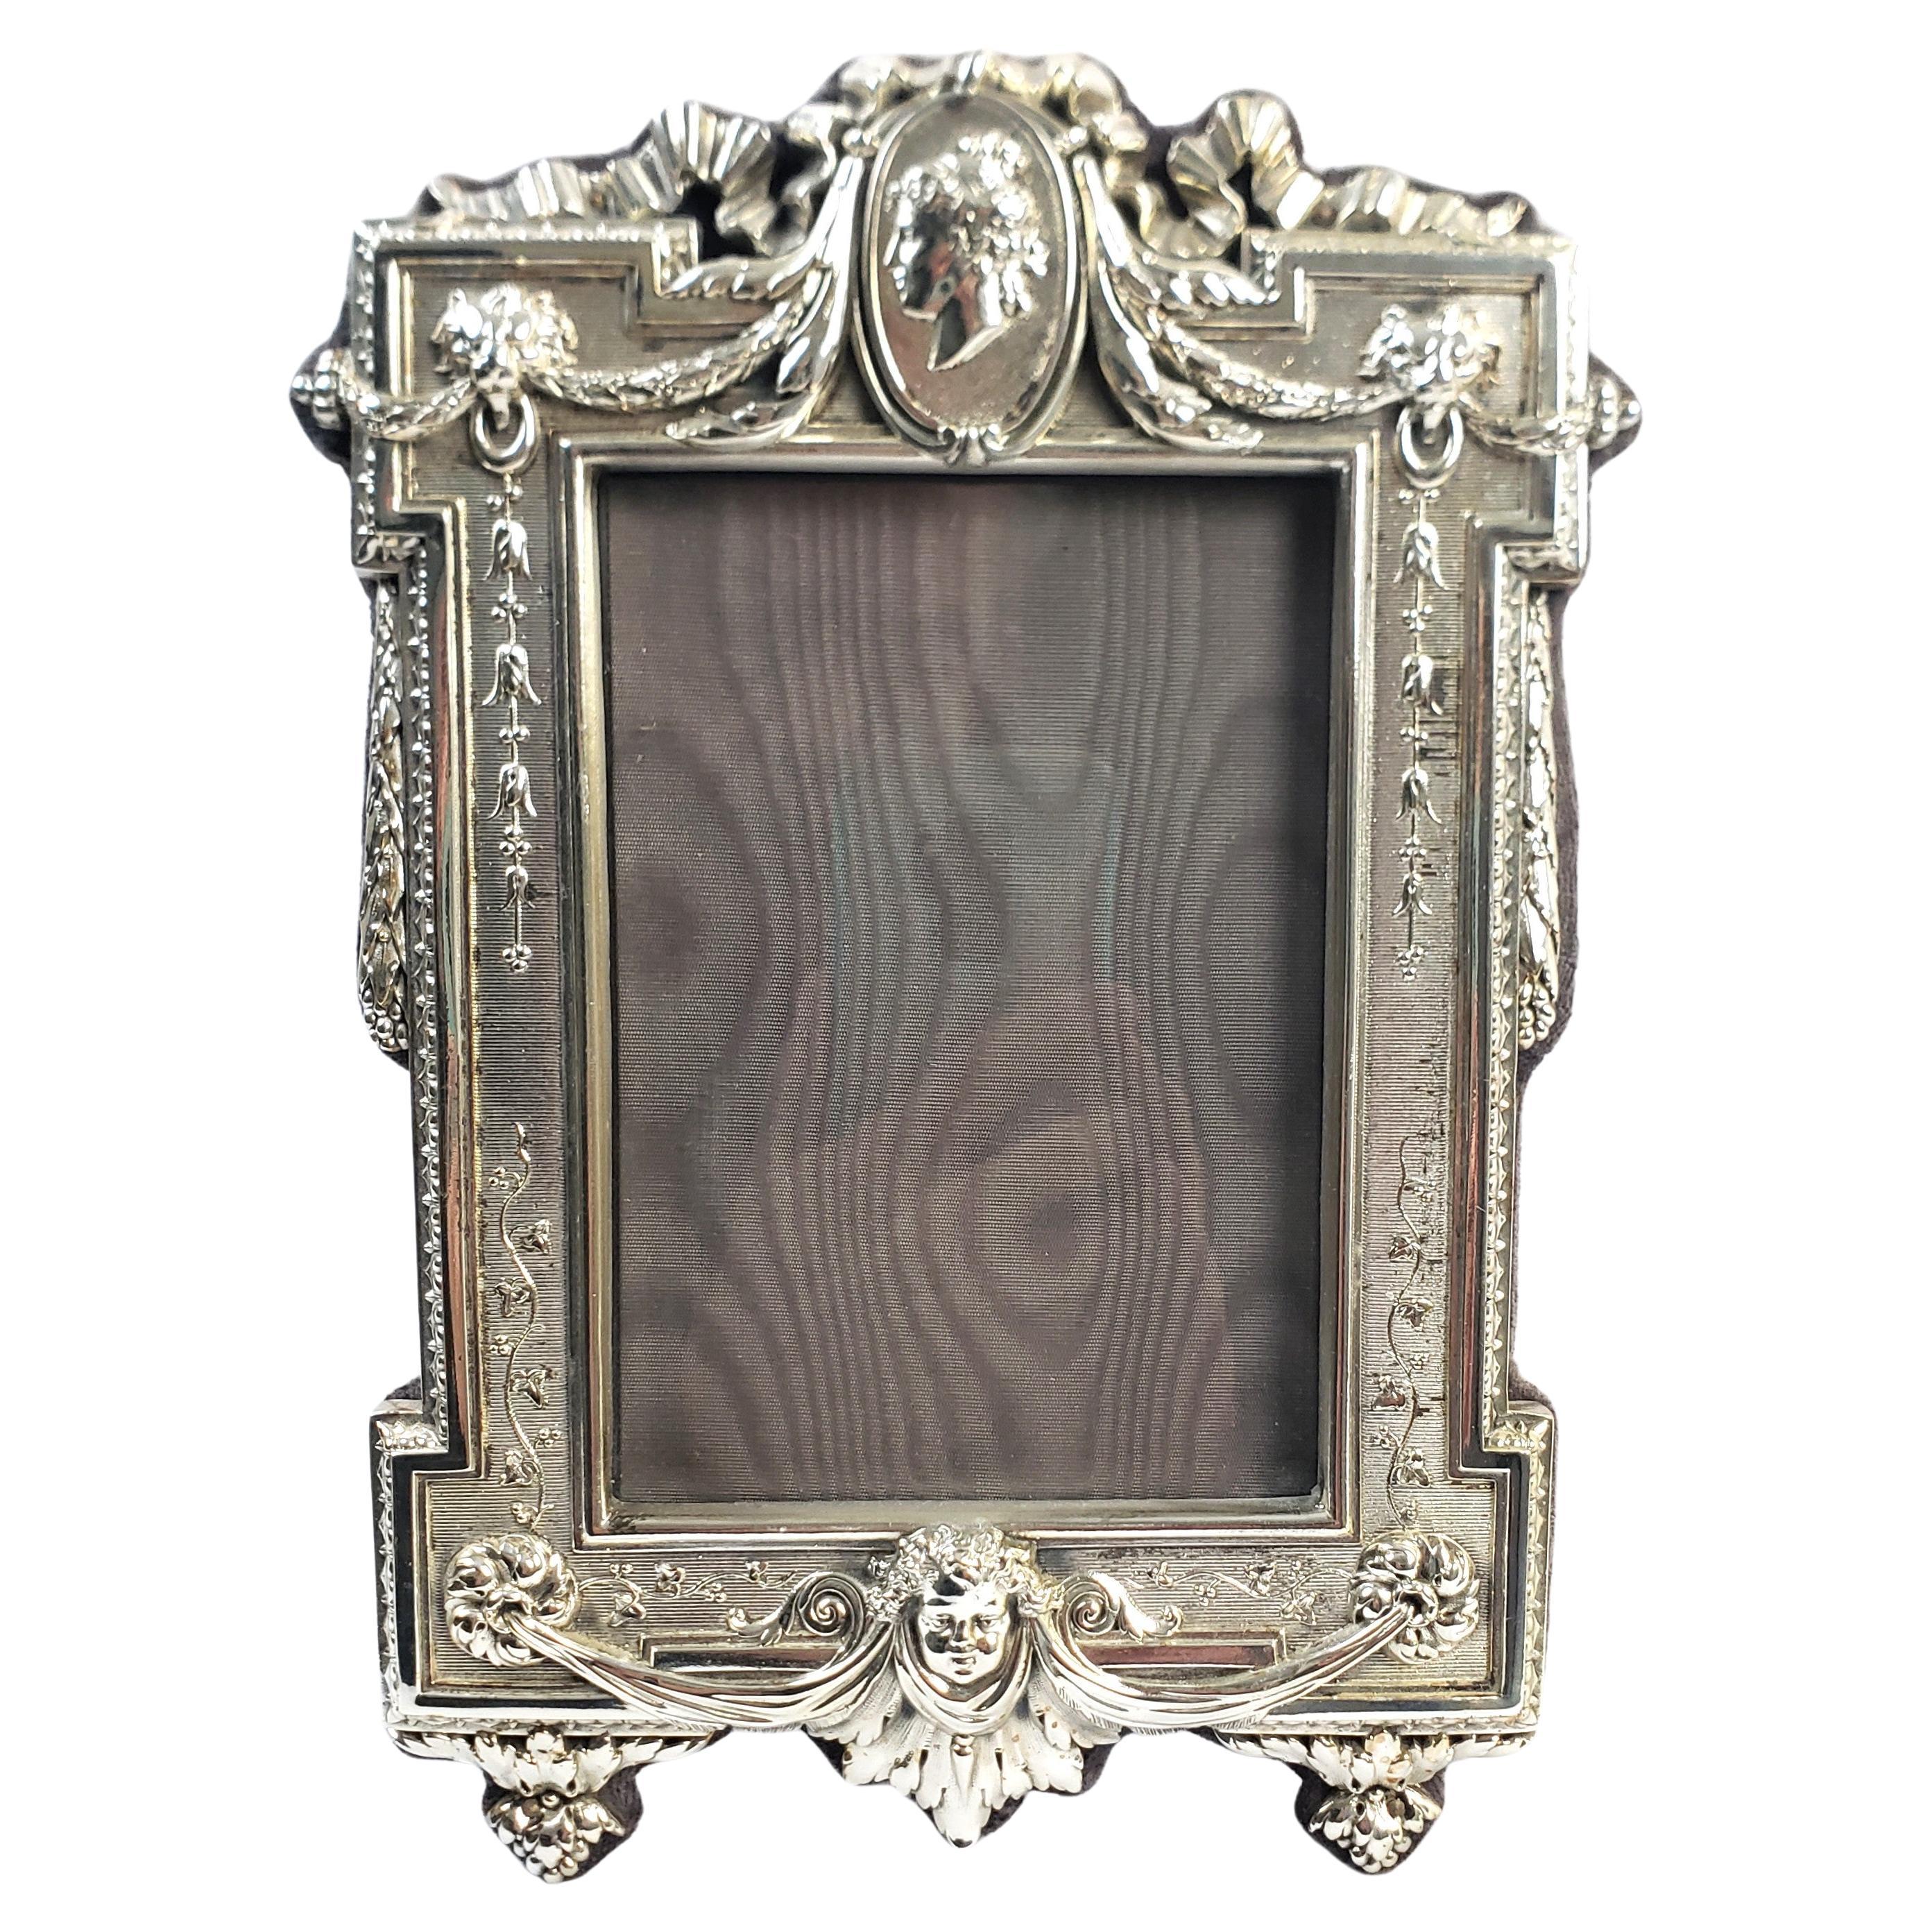 Vintage Italian Sterling Silver Picture or Mirror Frame with Ornate Gothic Motif